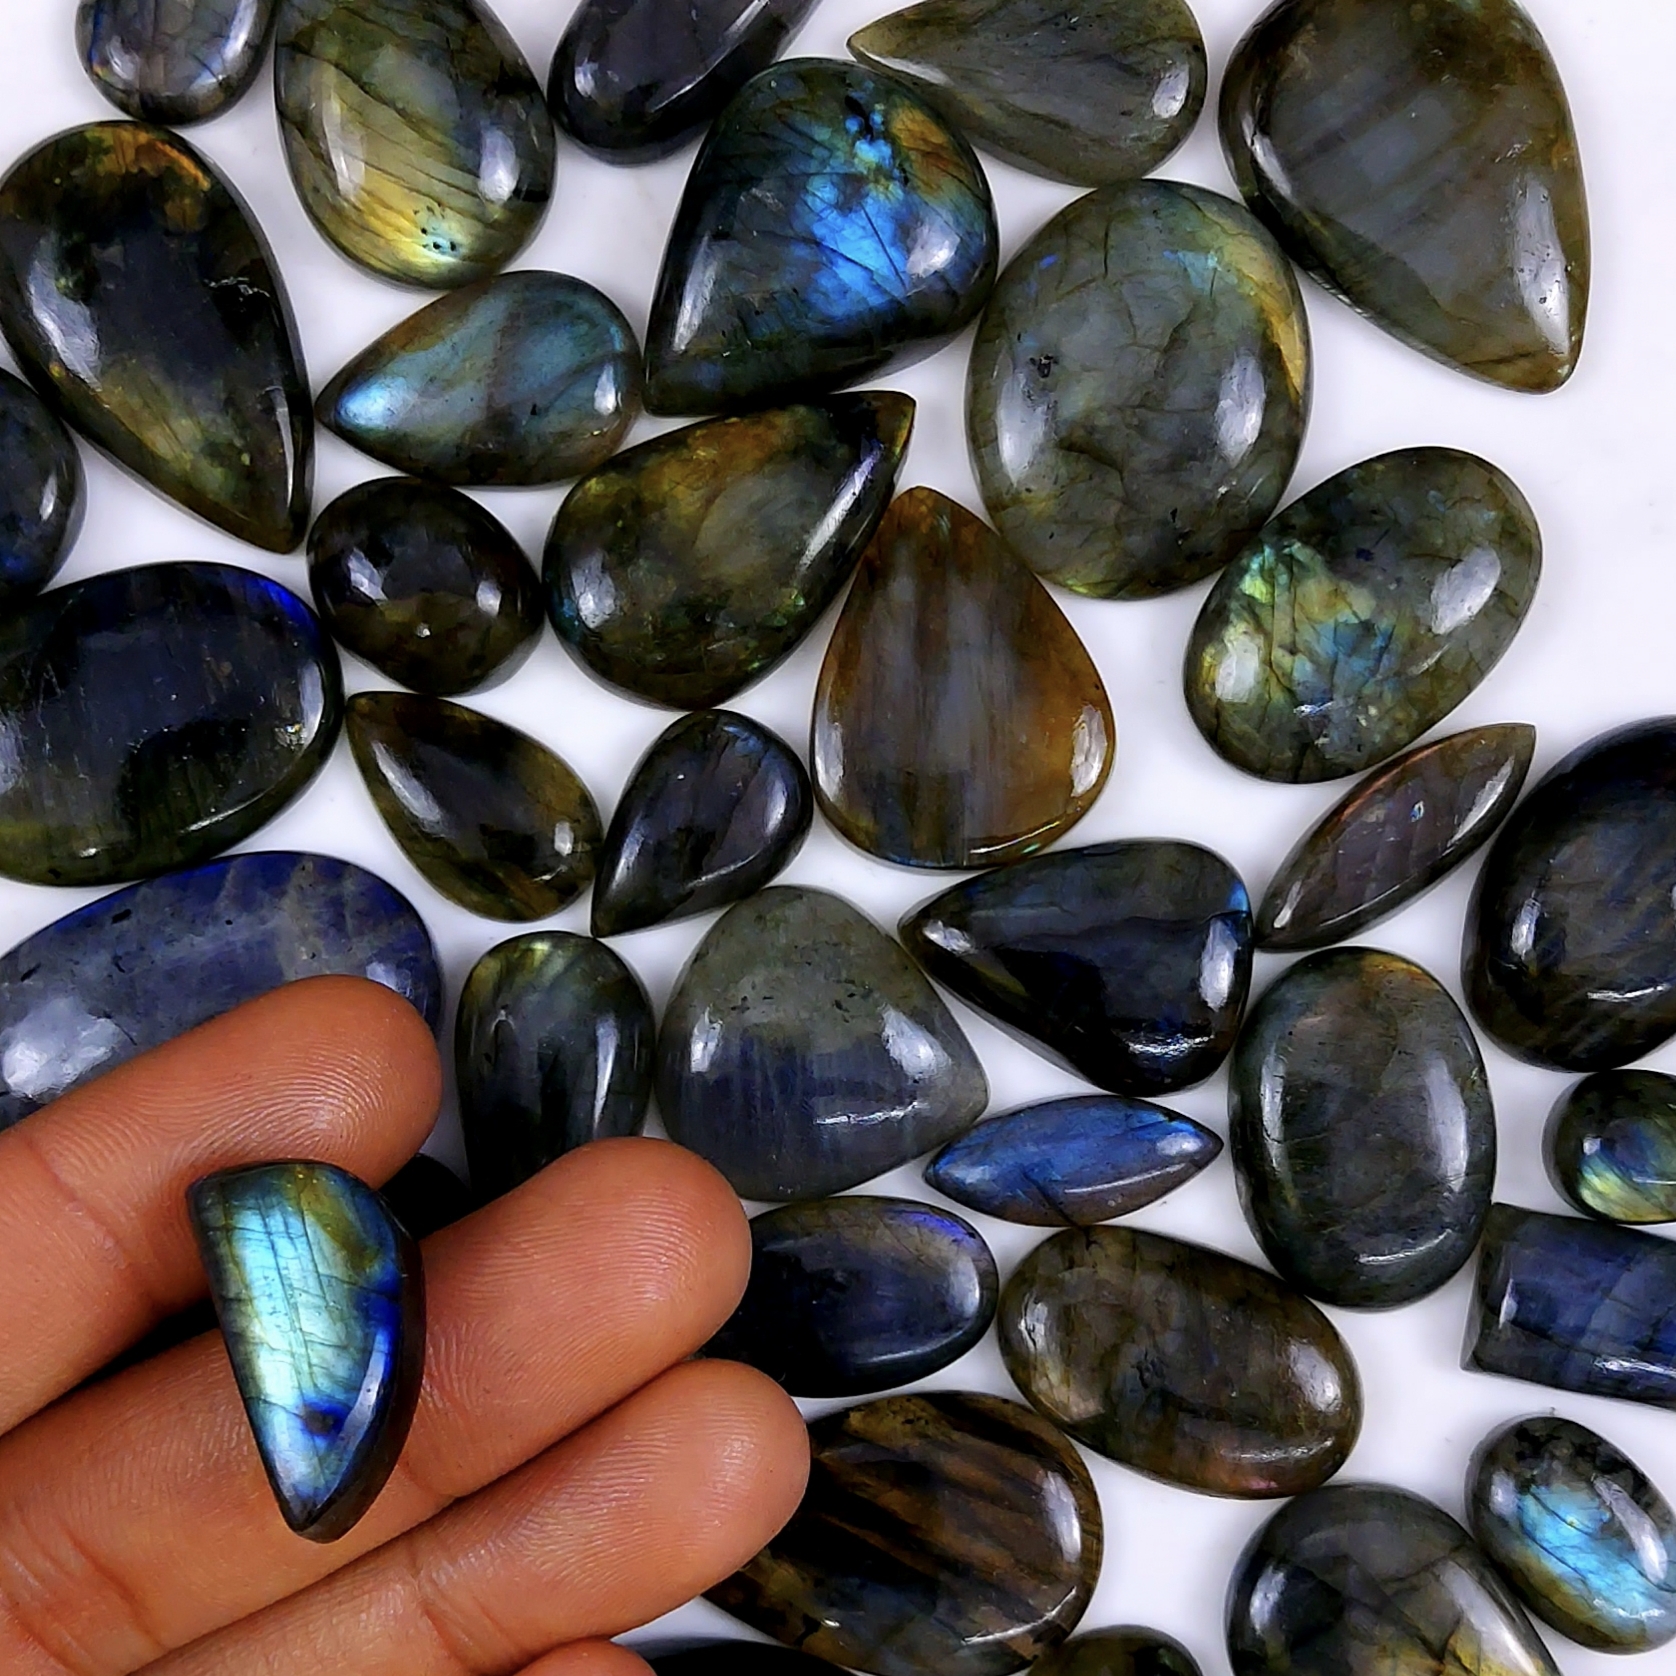 47pc 1495Cts Labradorite Cabochon Multifire Healing Crystal For Jewelry Supplies, Labradorite Necklace Handmade Wire Wrapped Gemstone Pendant 39x36 18x16mm#6383